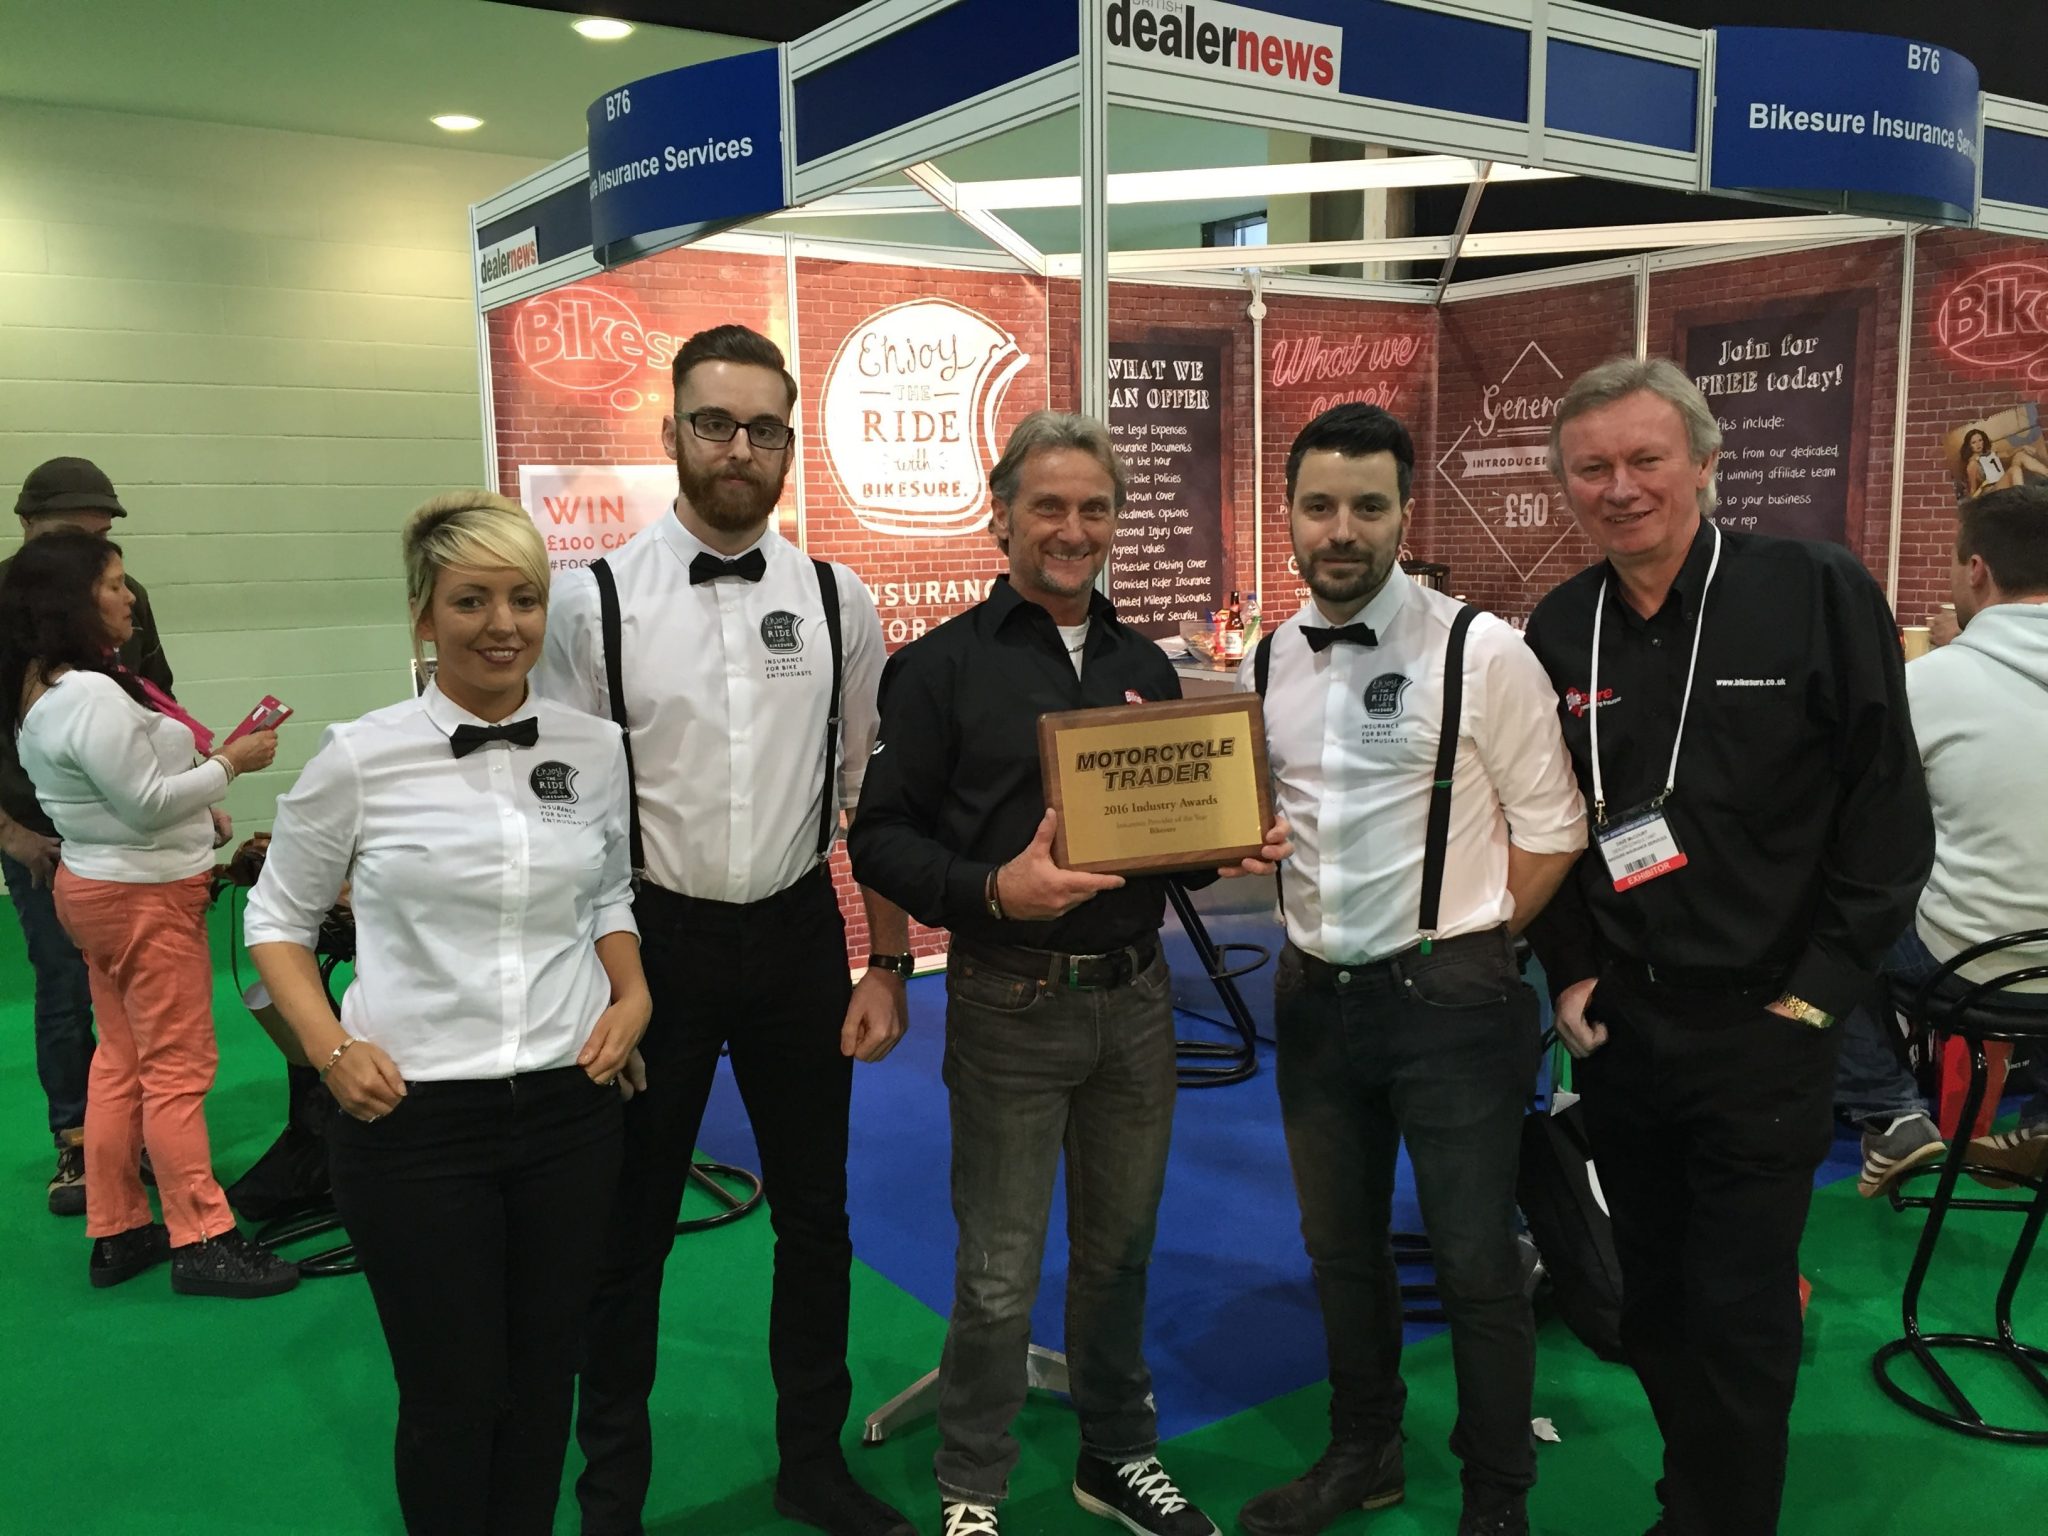 Dave McCourt, far right, celebrates an award with some of his Bikesure colleagues